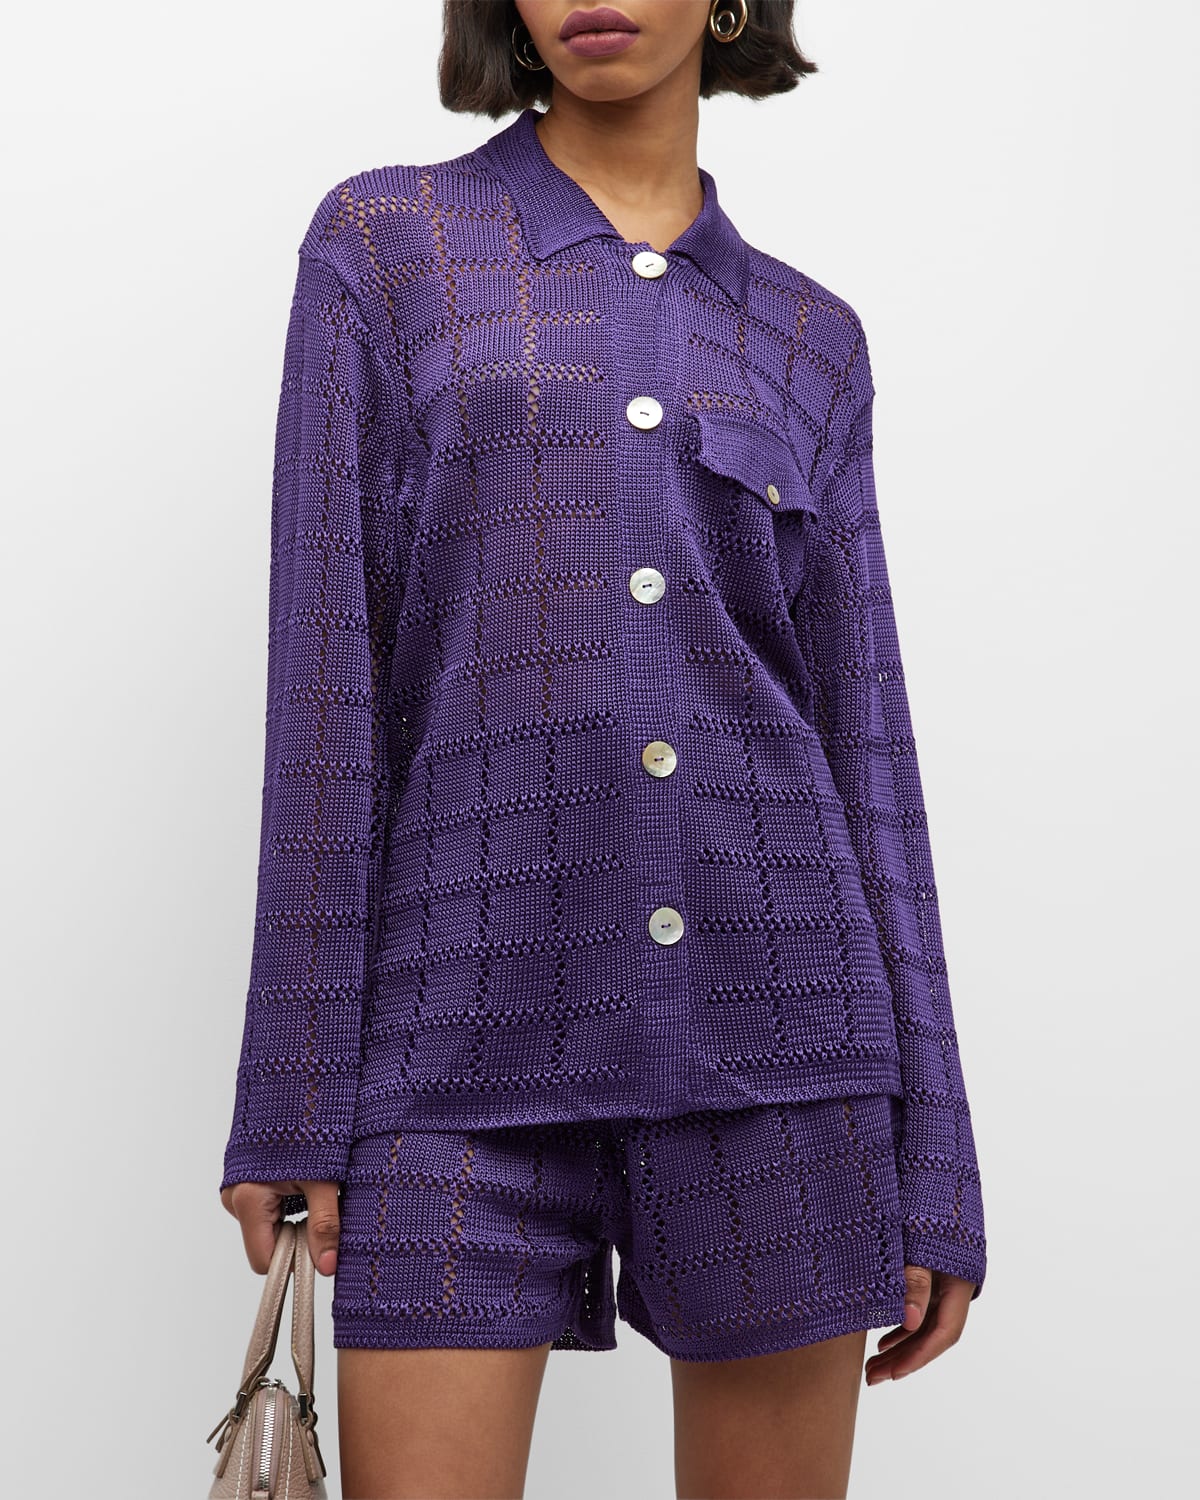 Calle Del Mar Long-Sleeve Patchwork Knit Shirt